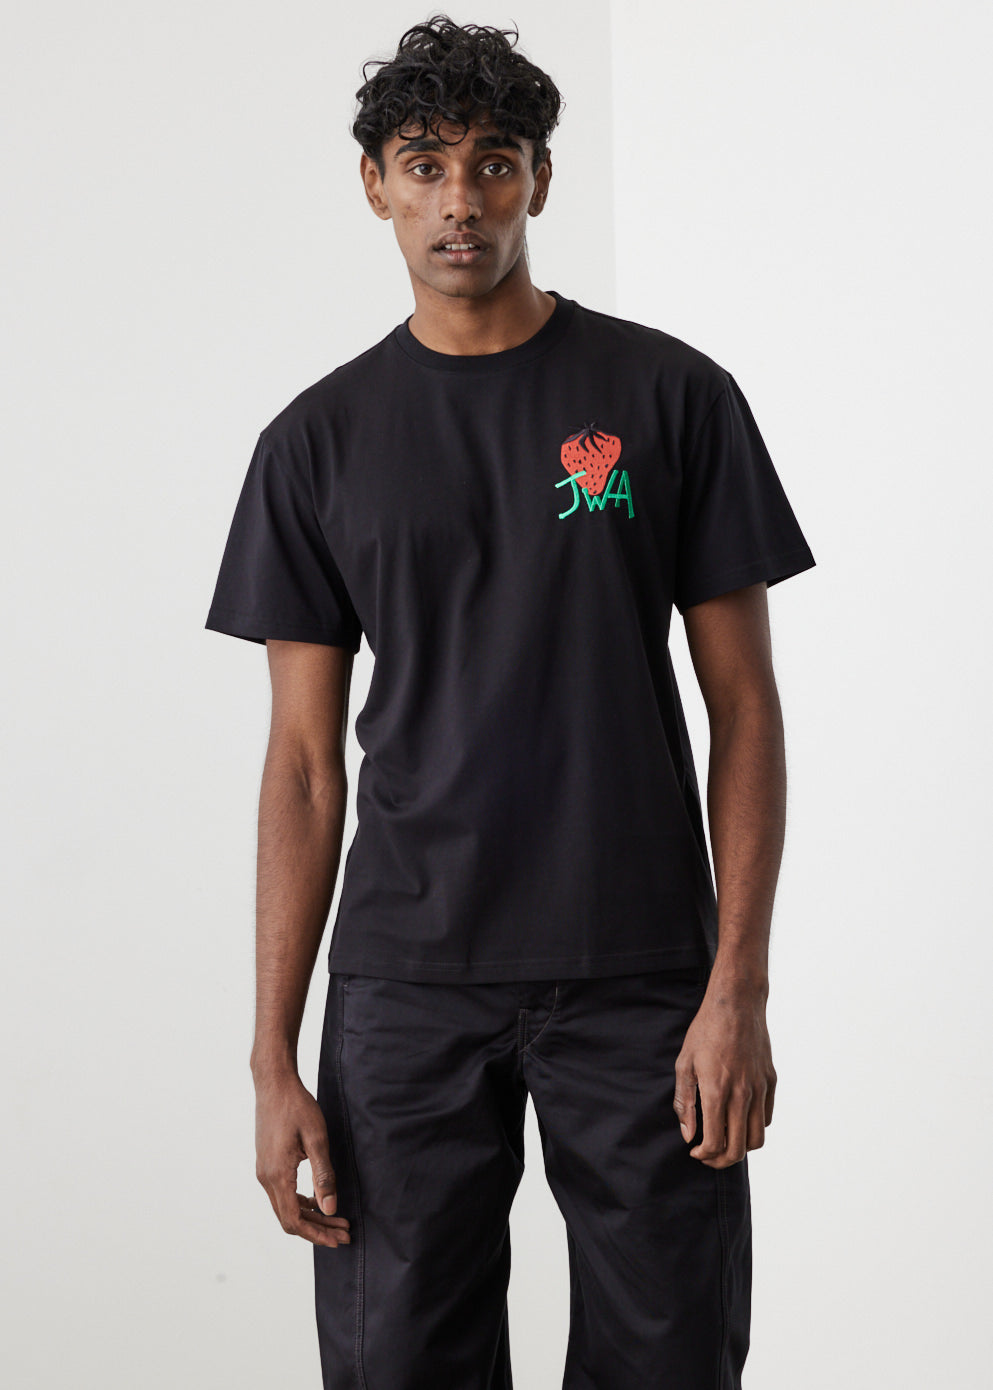 Embroidered Strawberry T-Shirt